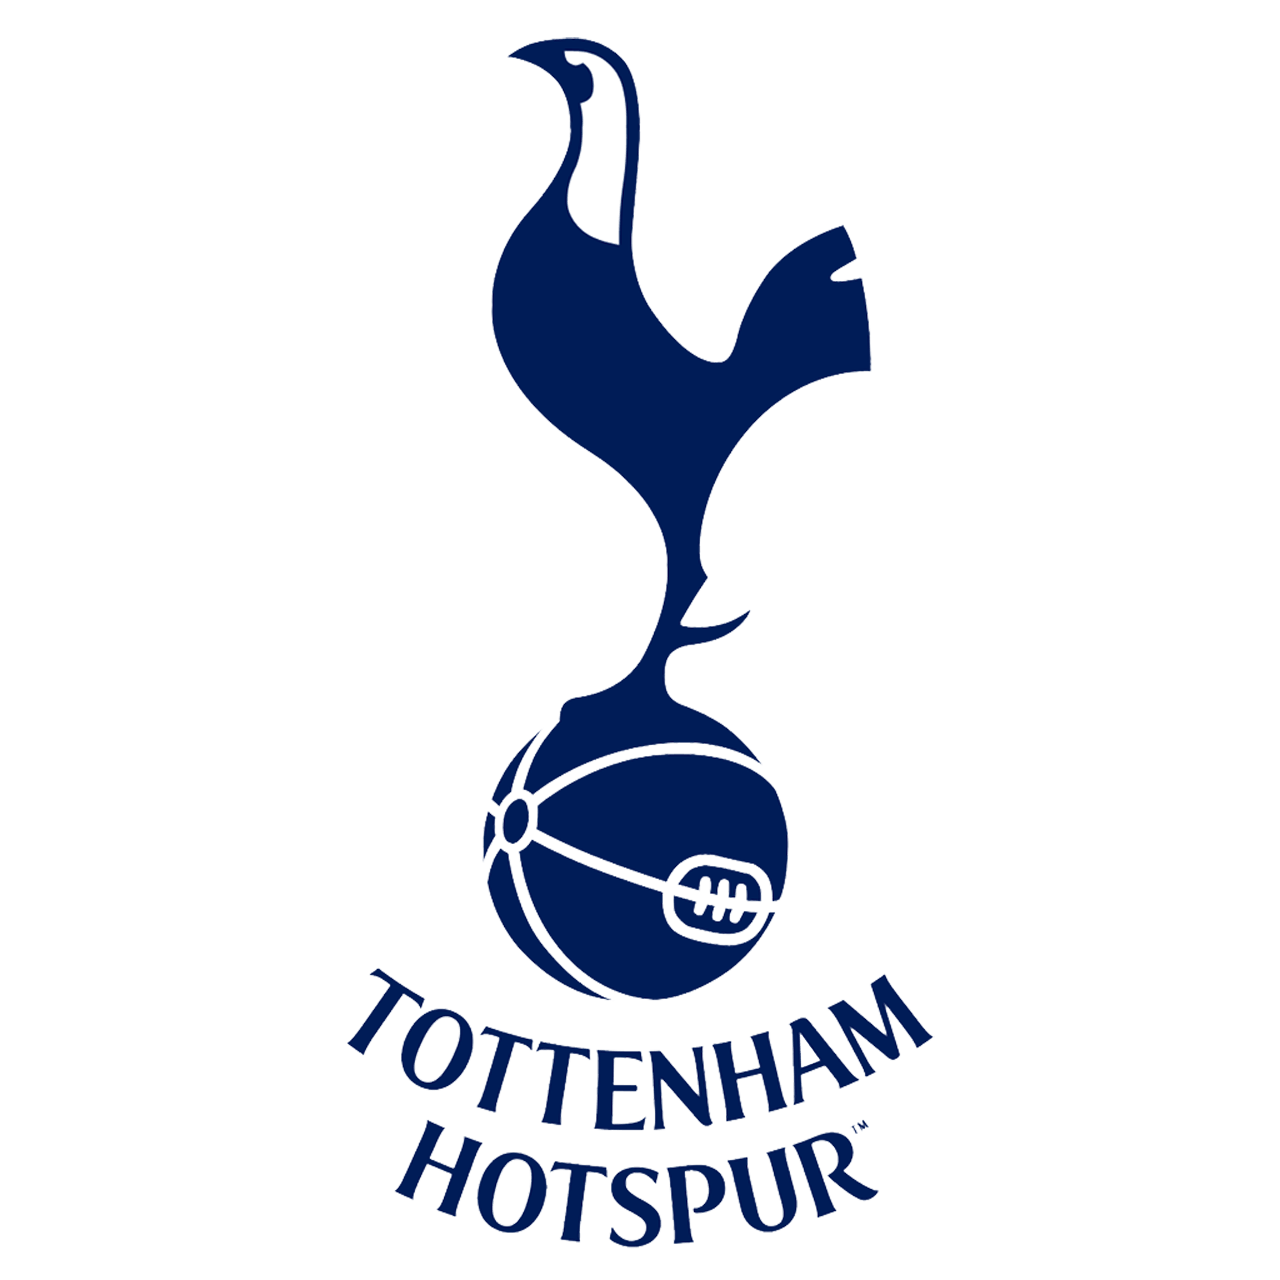 Tottenham Hotspur Logo - Tottenham Hotspur Logo transparent PNG